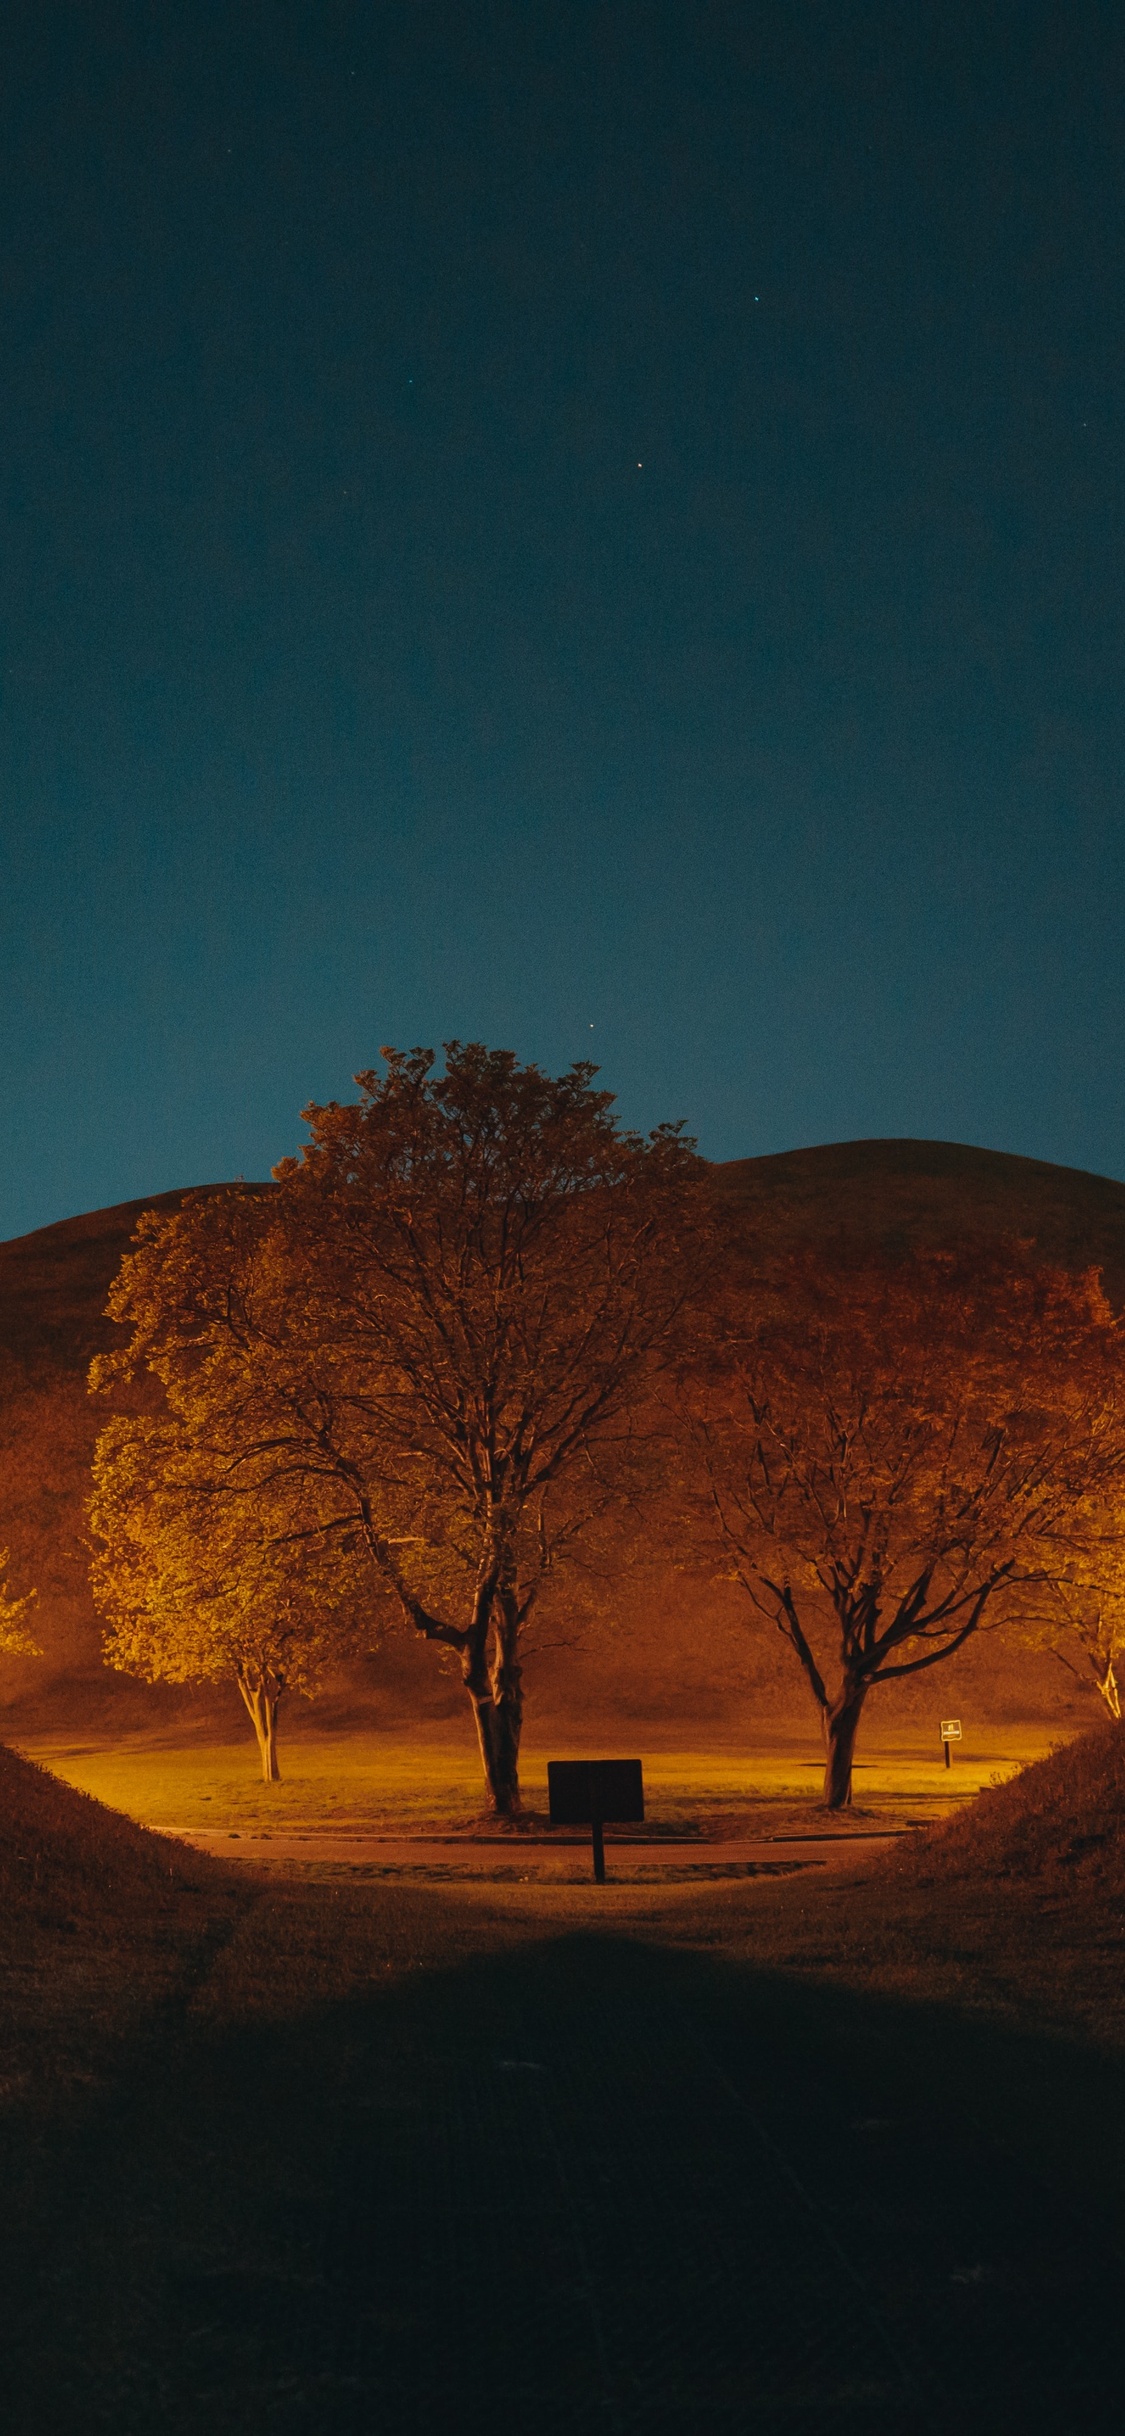 leafless-tree-on-brown-field-during-night-time-ep.jpg